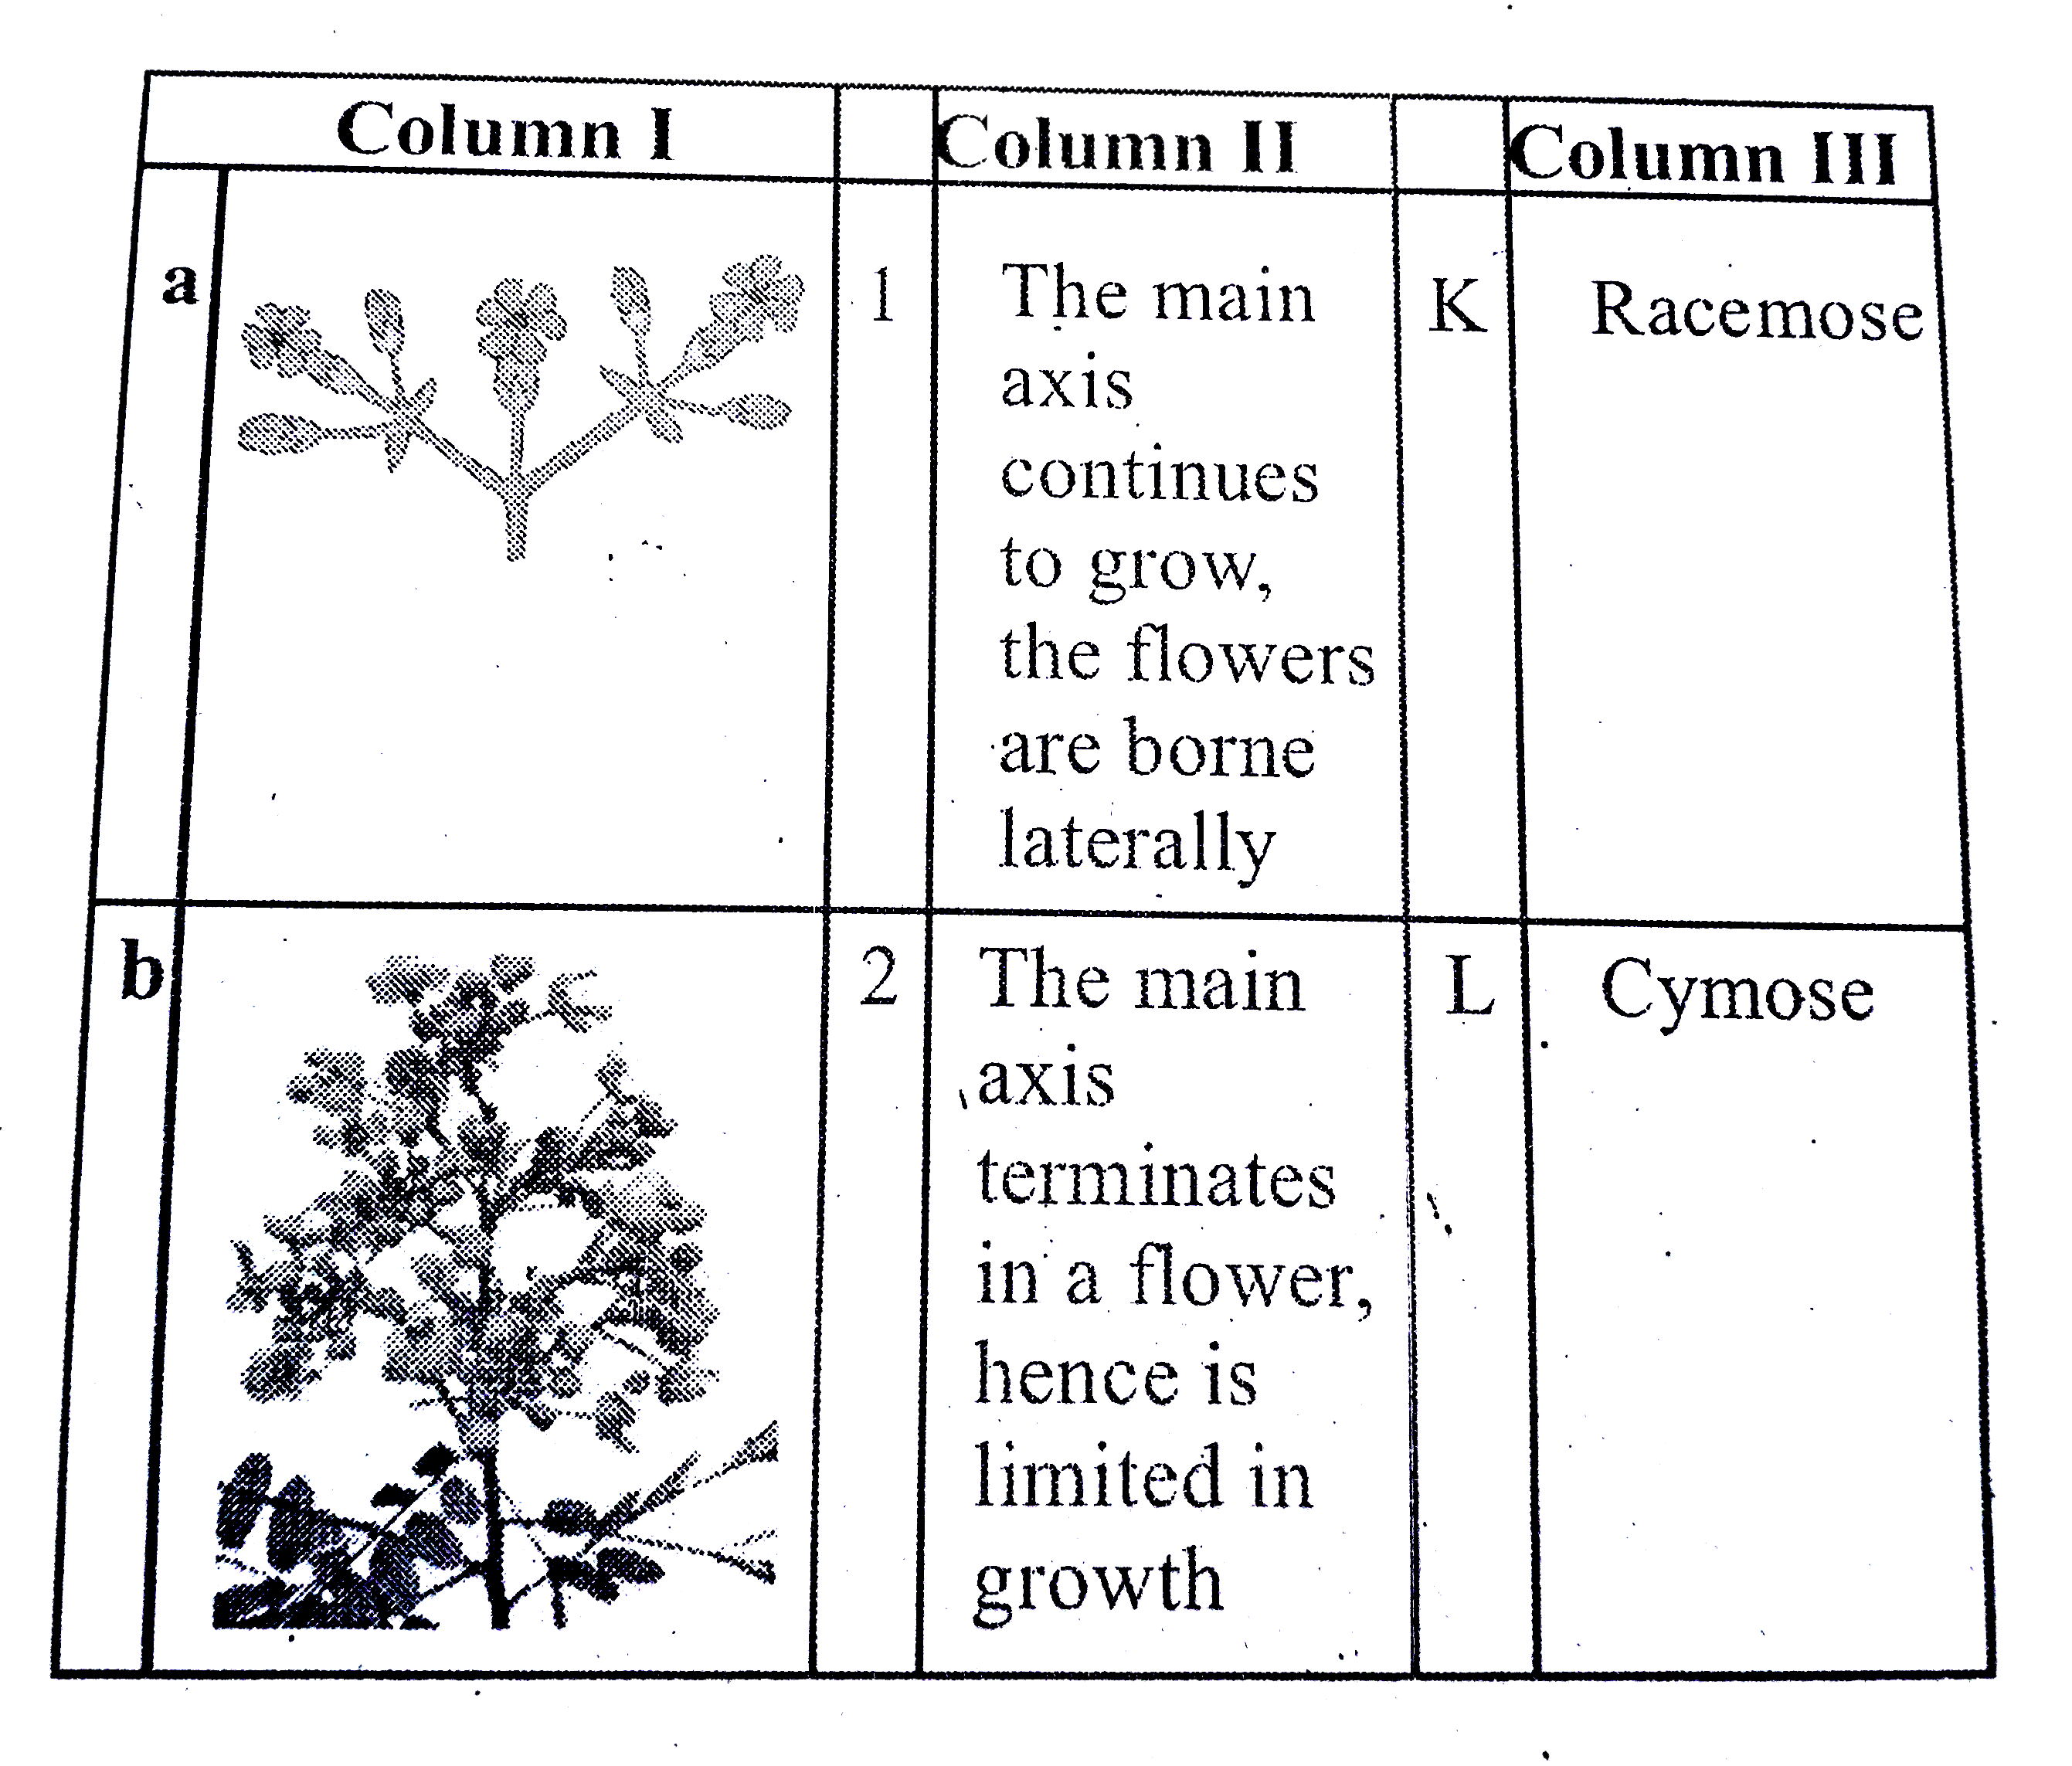 Match the columns I, II and III and choose the correct combination from the option given :